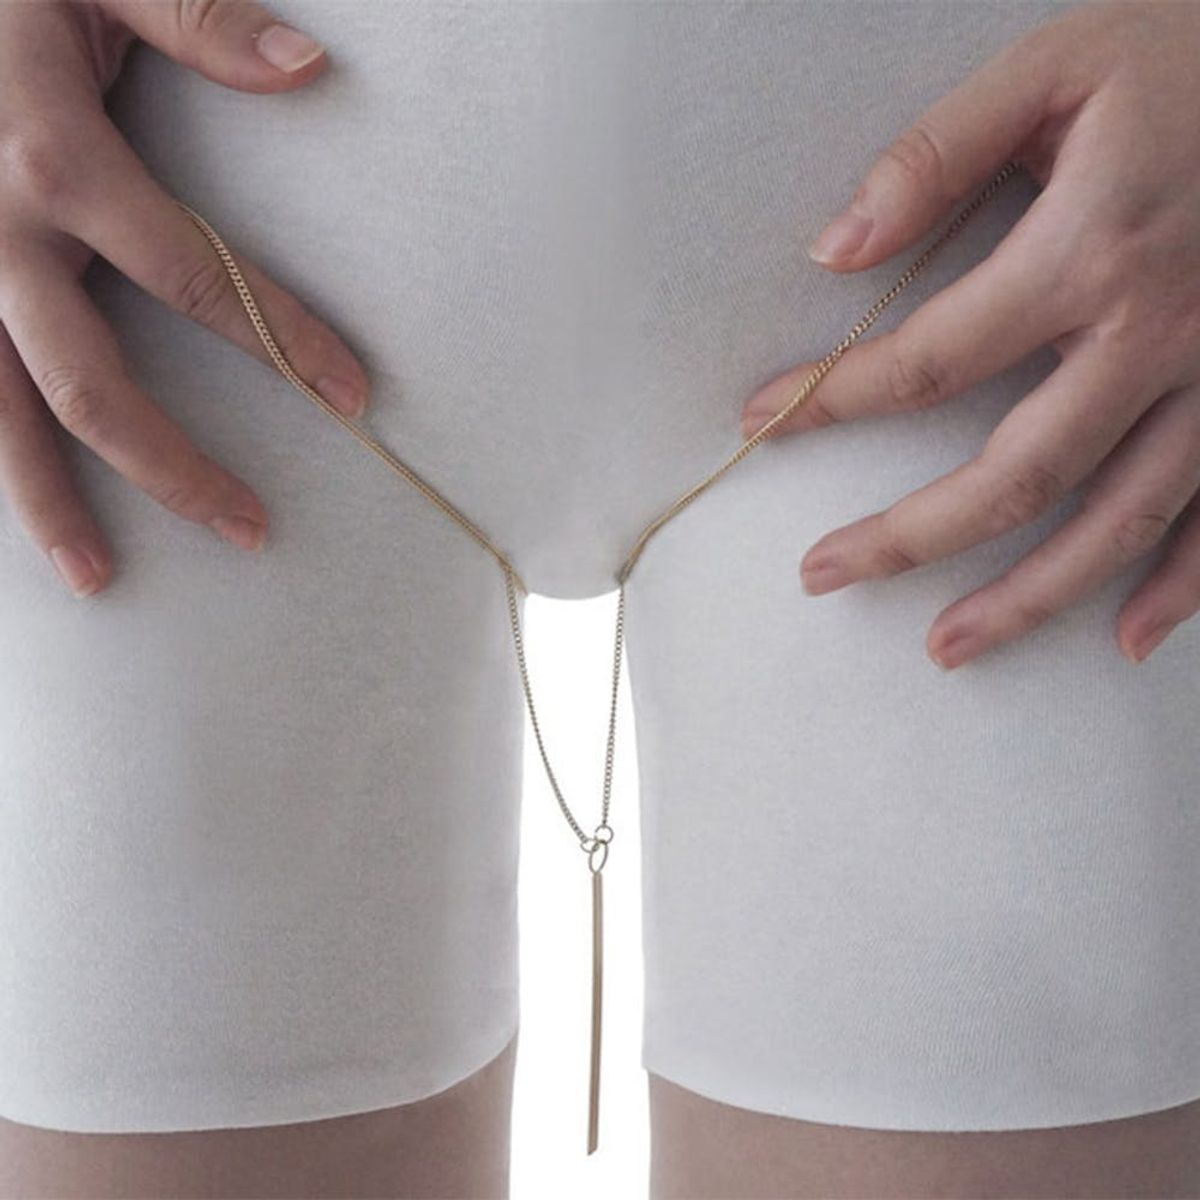 Why This Creepy Thigh Gap Jewelry Company Is Actually Body Positive